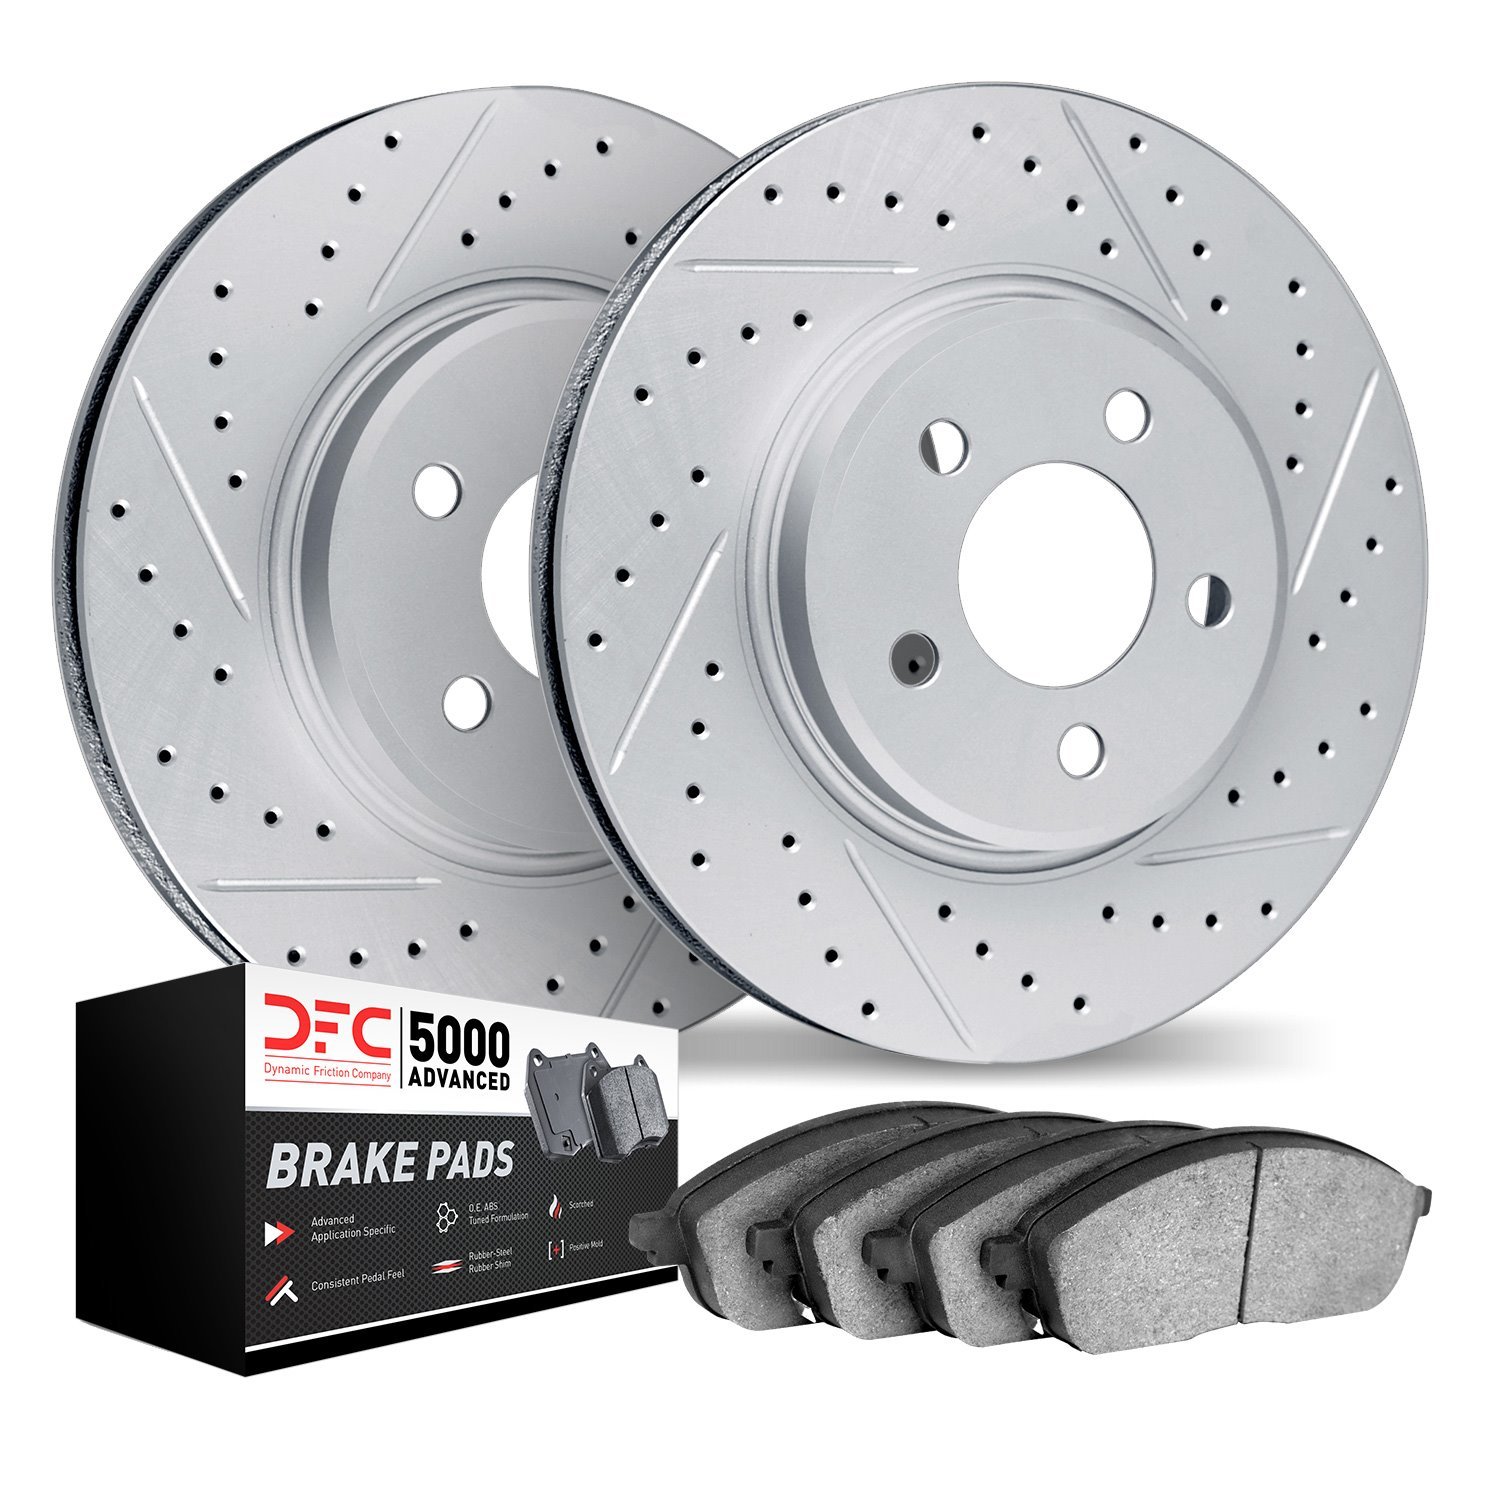 2502-73005 Geoperformance Drilled/Slotted Rotors w/5000 Advanced Brake Pads Kit, 2000-2003 Audi/Volkswagen, Position: Front